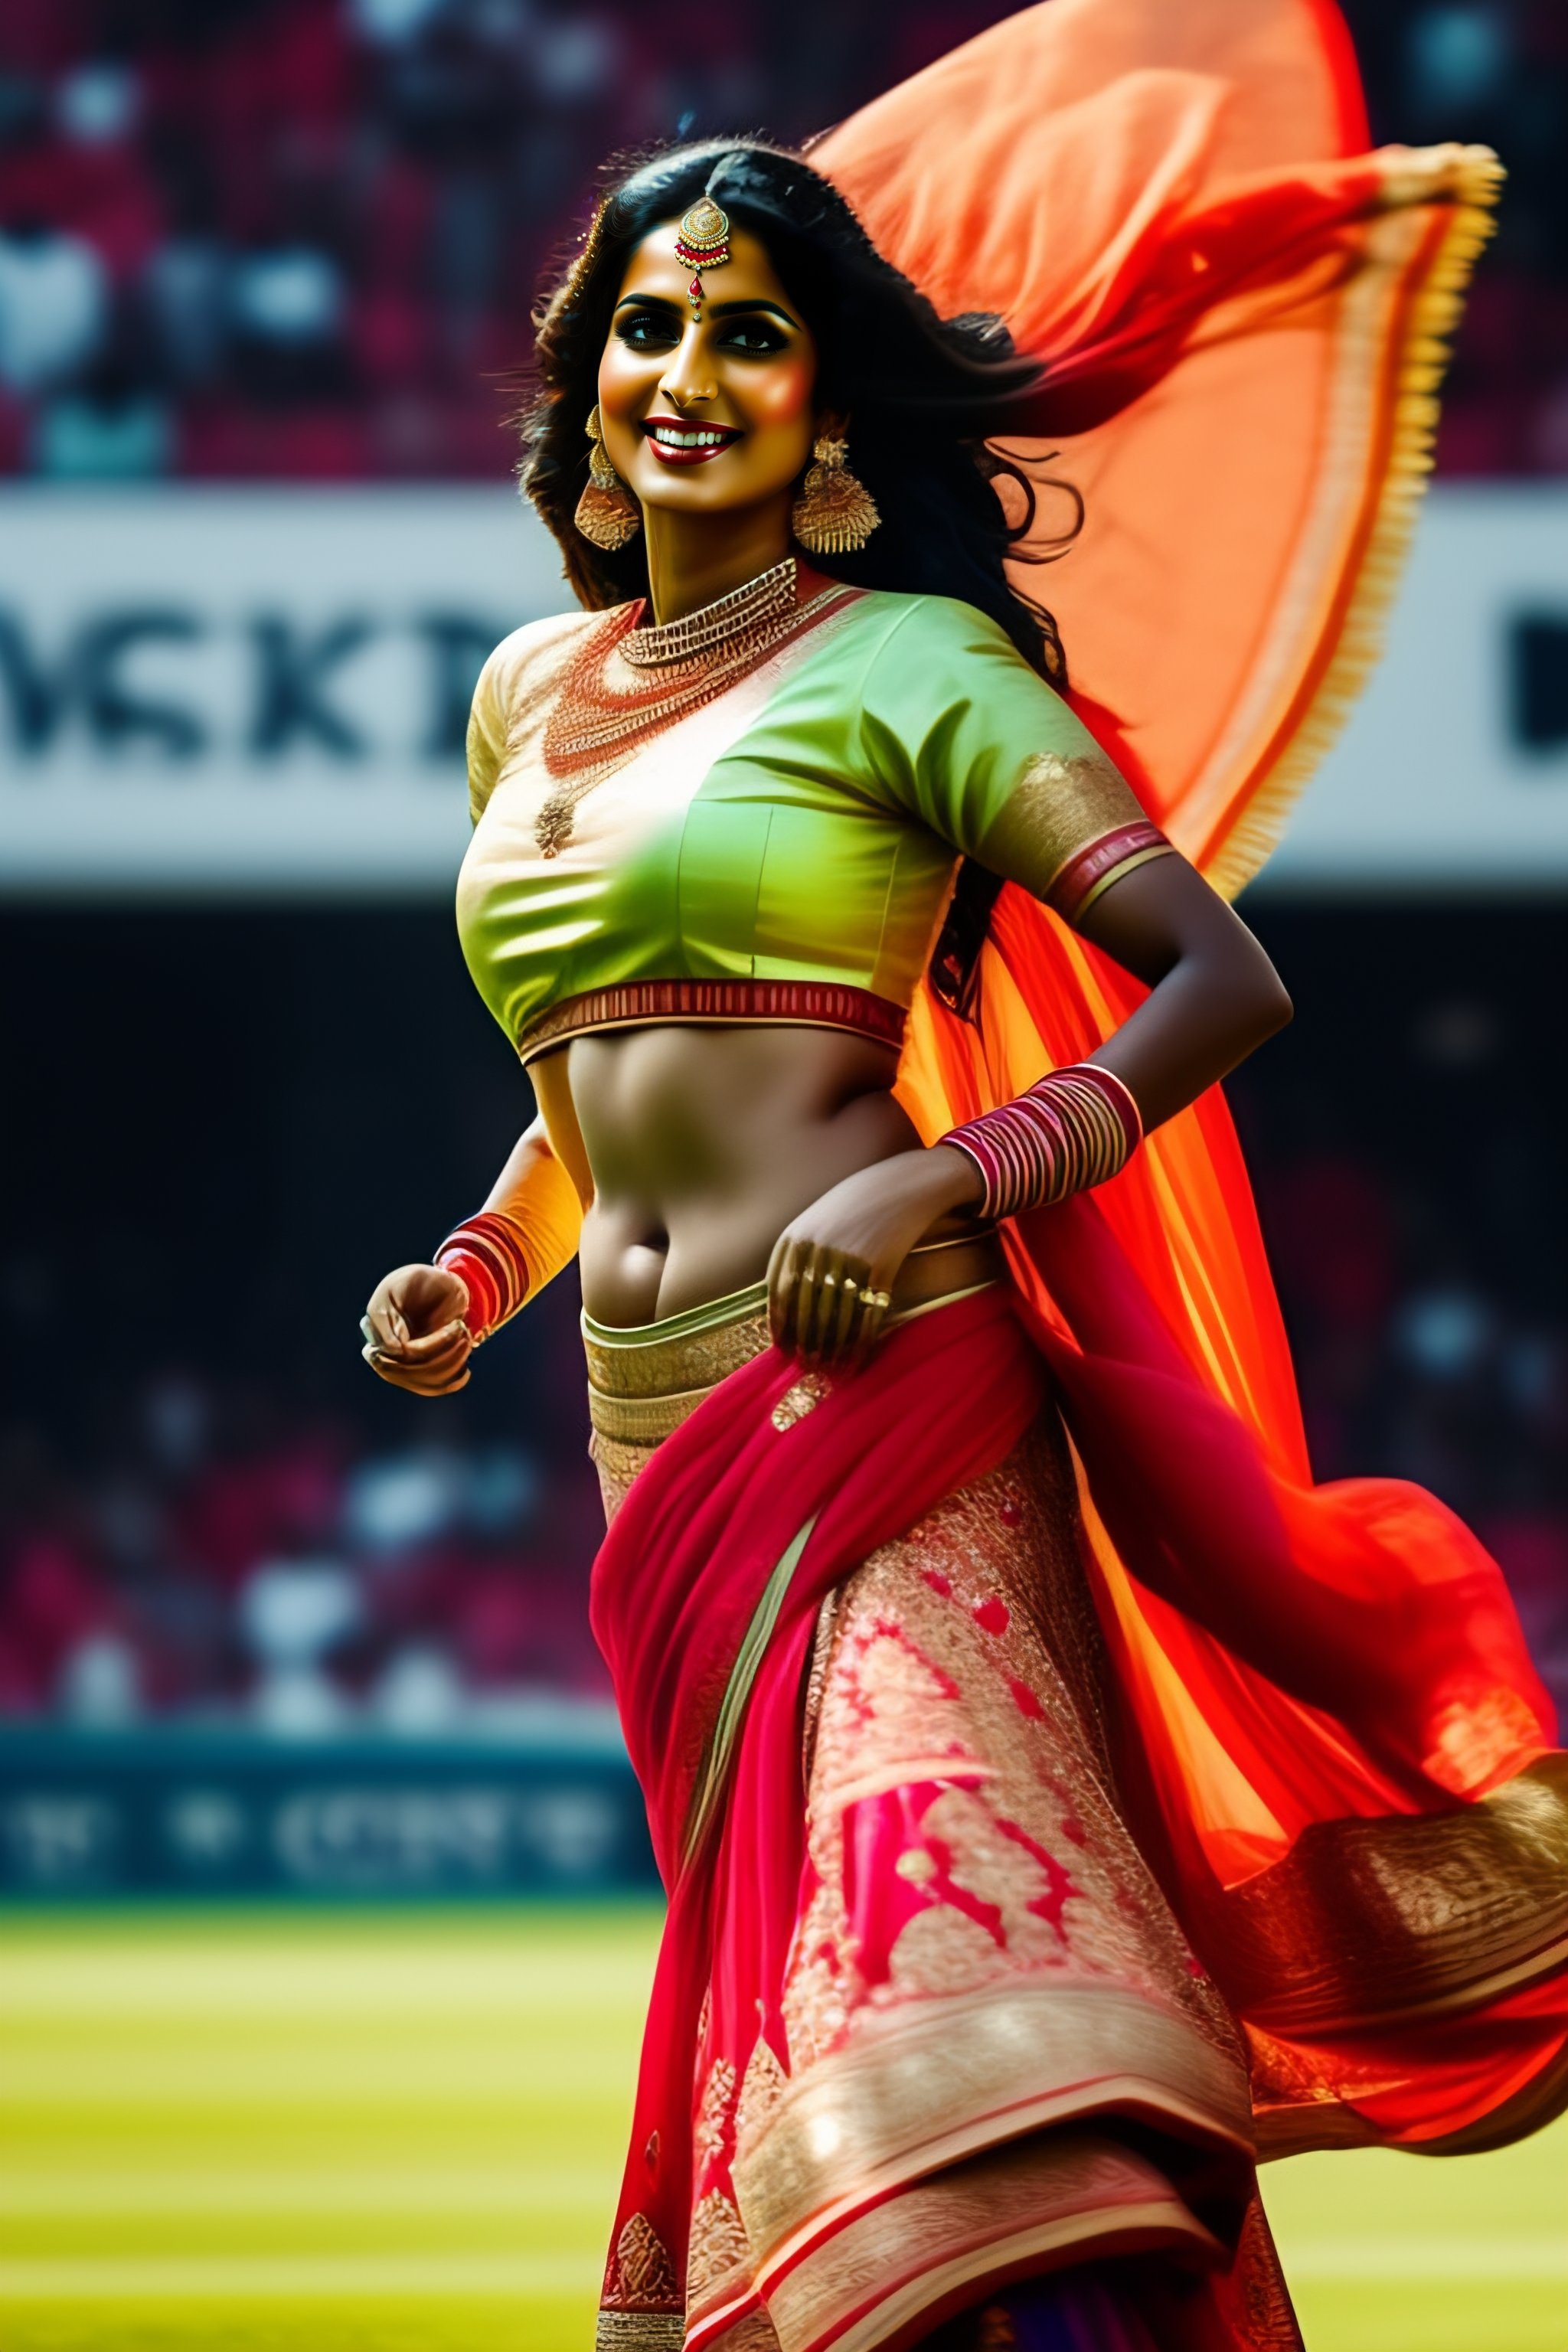 Lexica - A young girl wearing saree and playing football